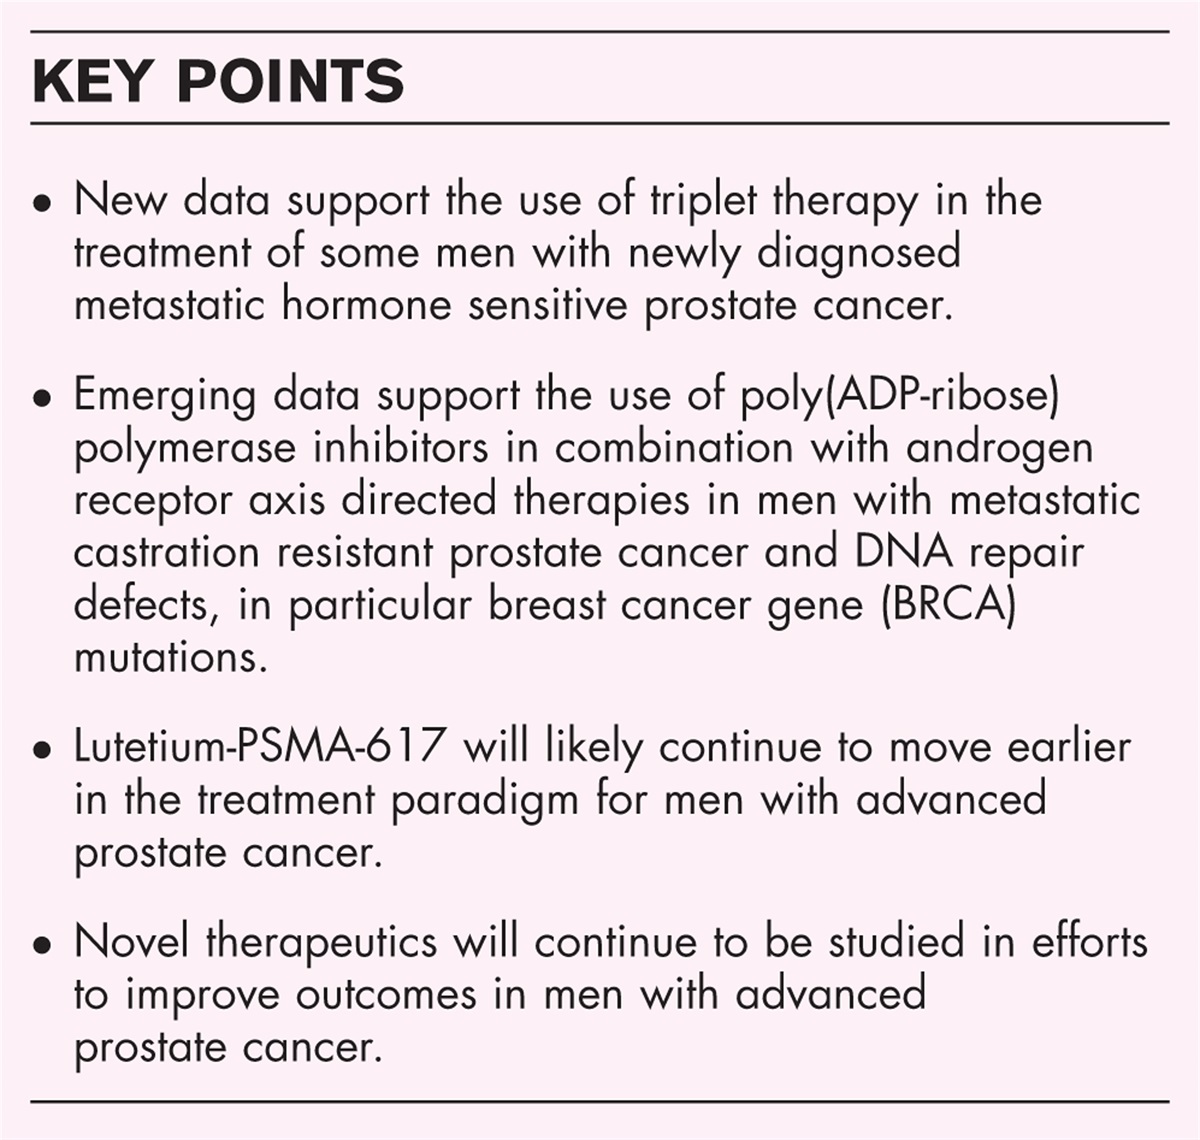 Highlighting recent progress in the treatment of men with advanced prostate cancer